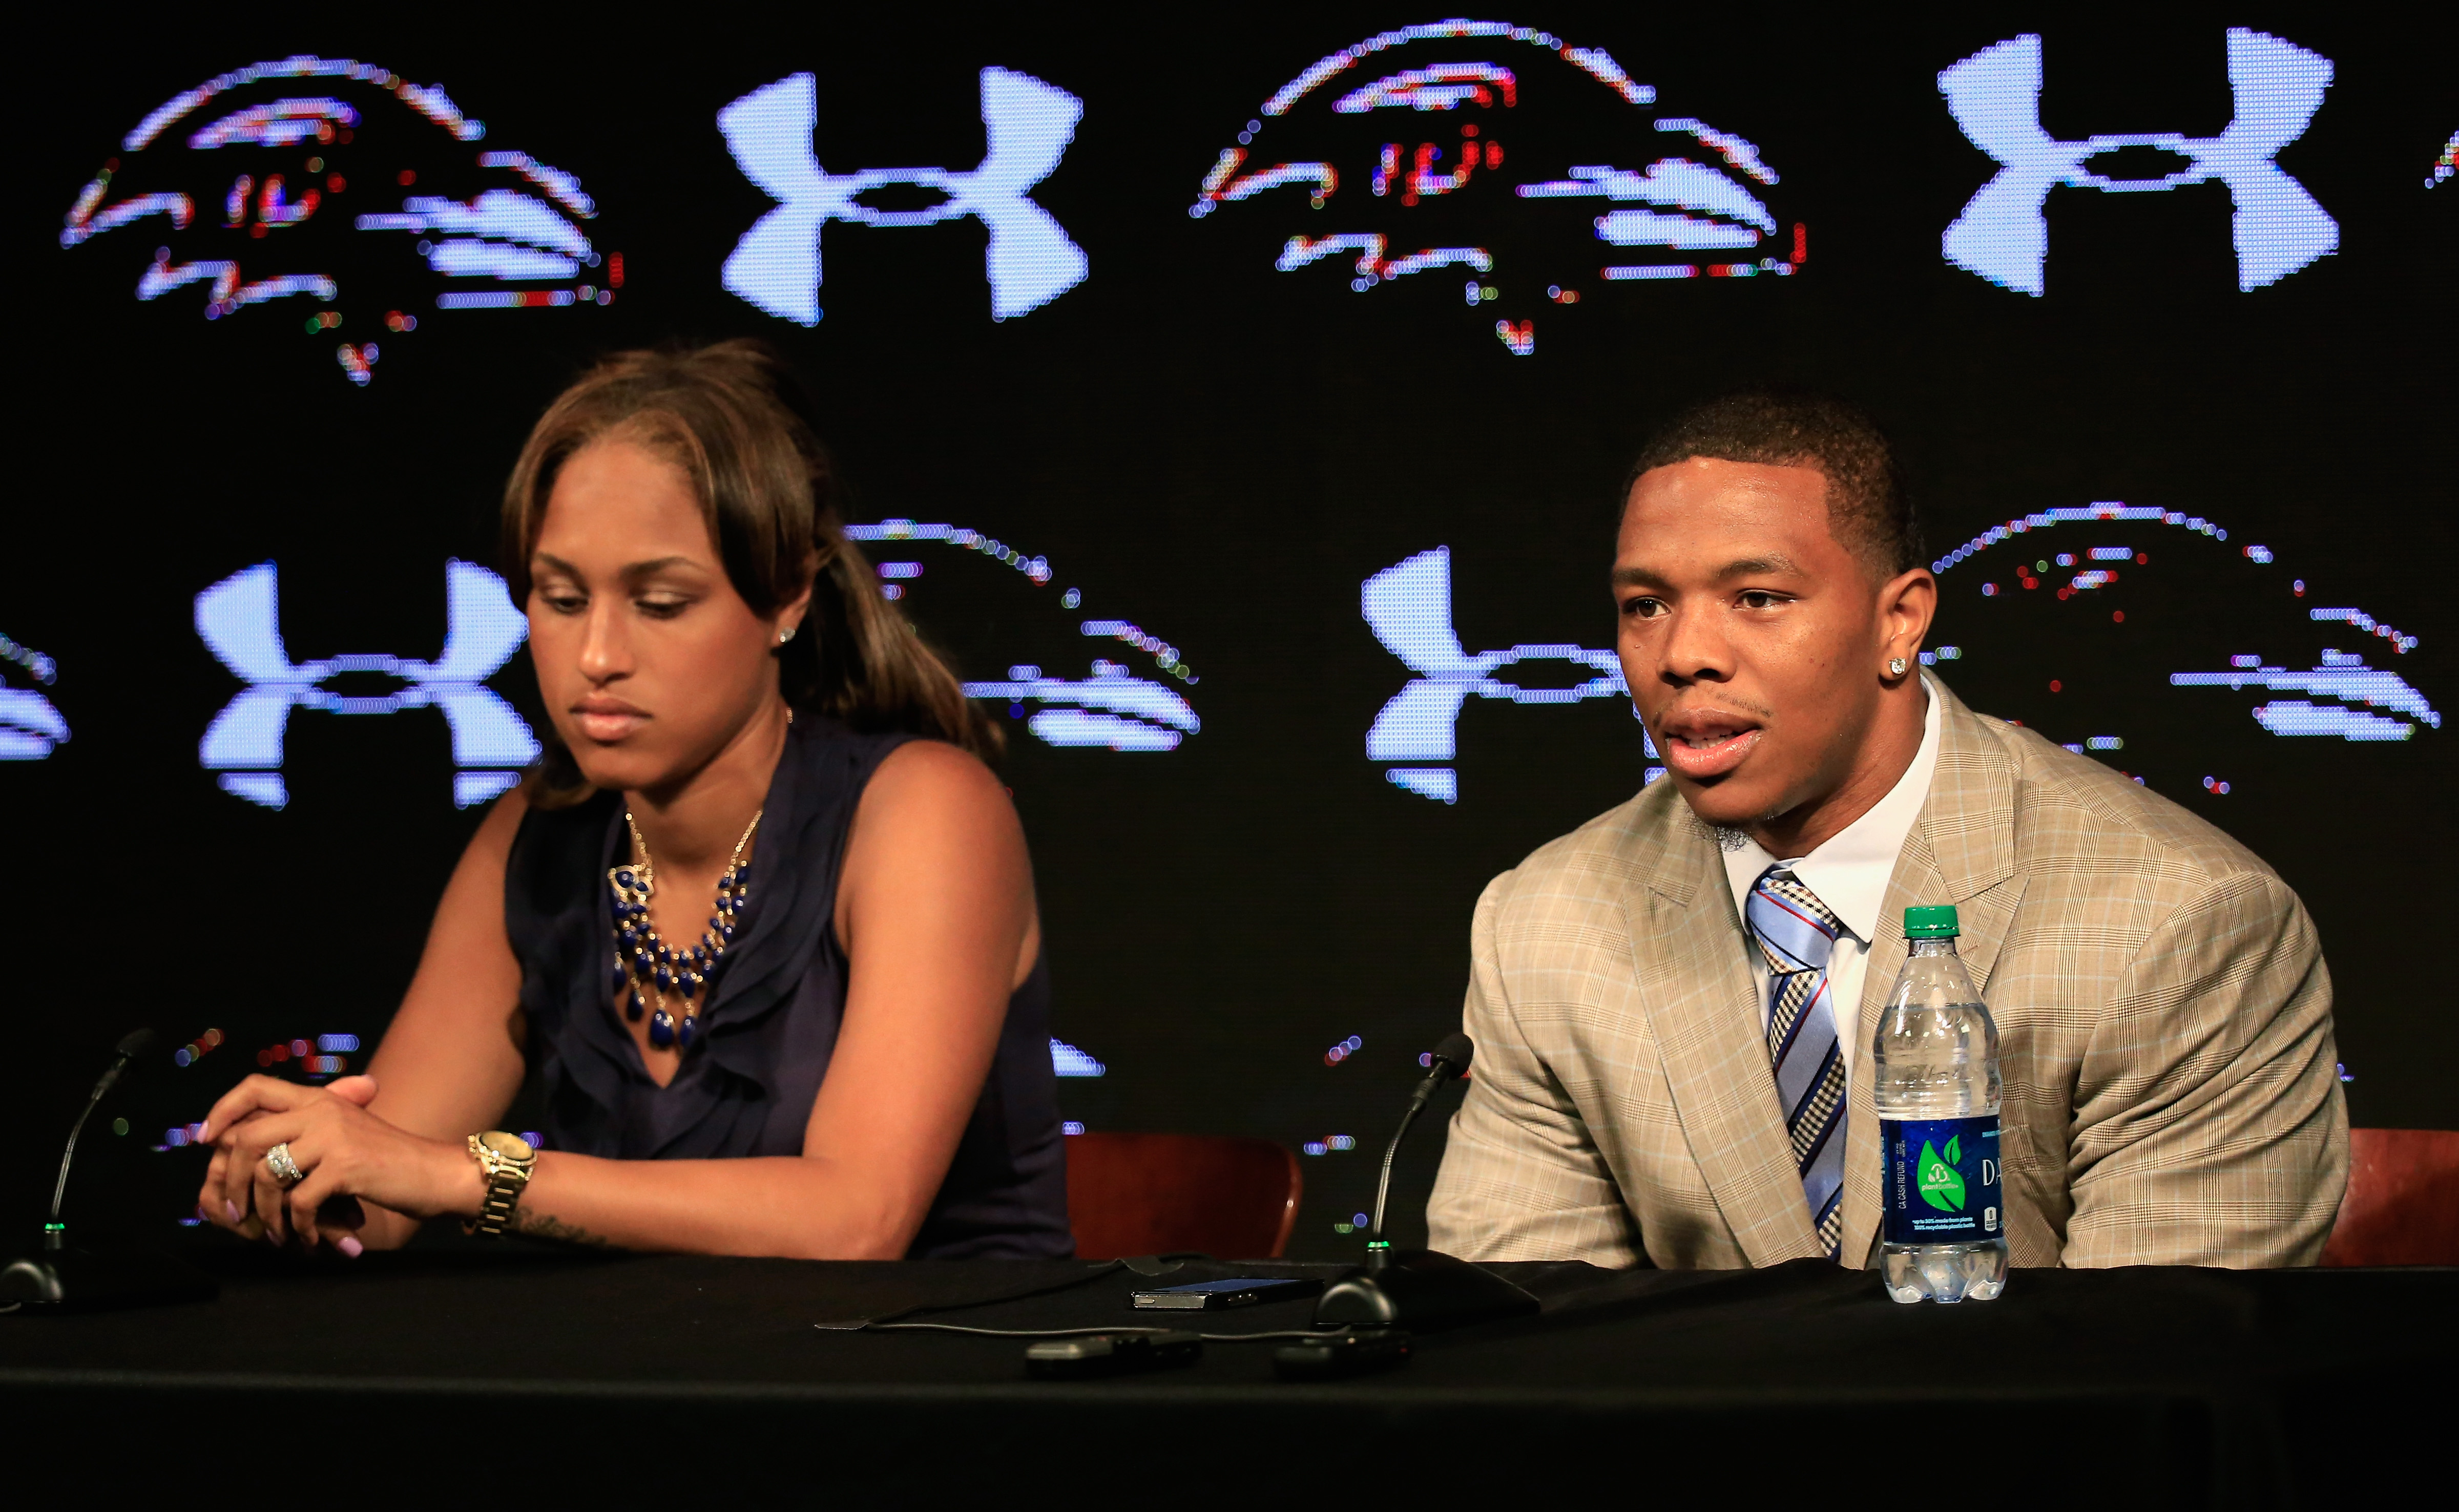 Running back Ray Rice of the Baltimore Ravens addresses a news conference with his wife Janay at the Ravens training center on May 23, 2014 in Owings Mills, Maryland. (Rob Carr&amp;mdash;Getty Images)